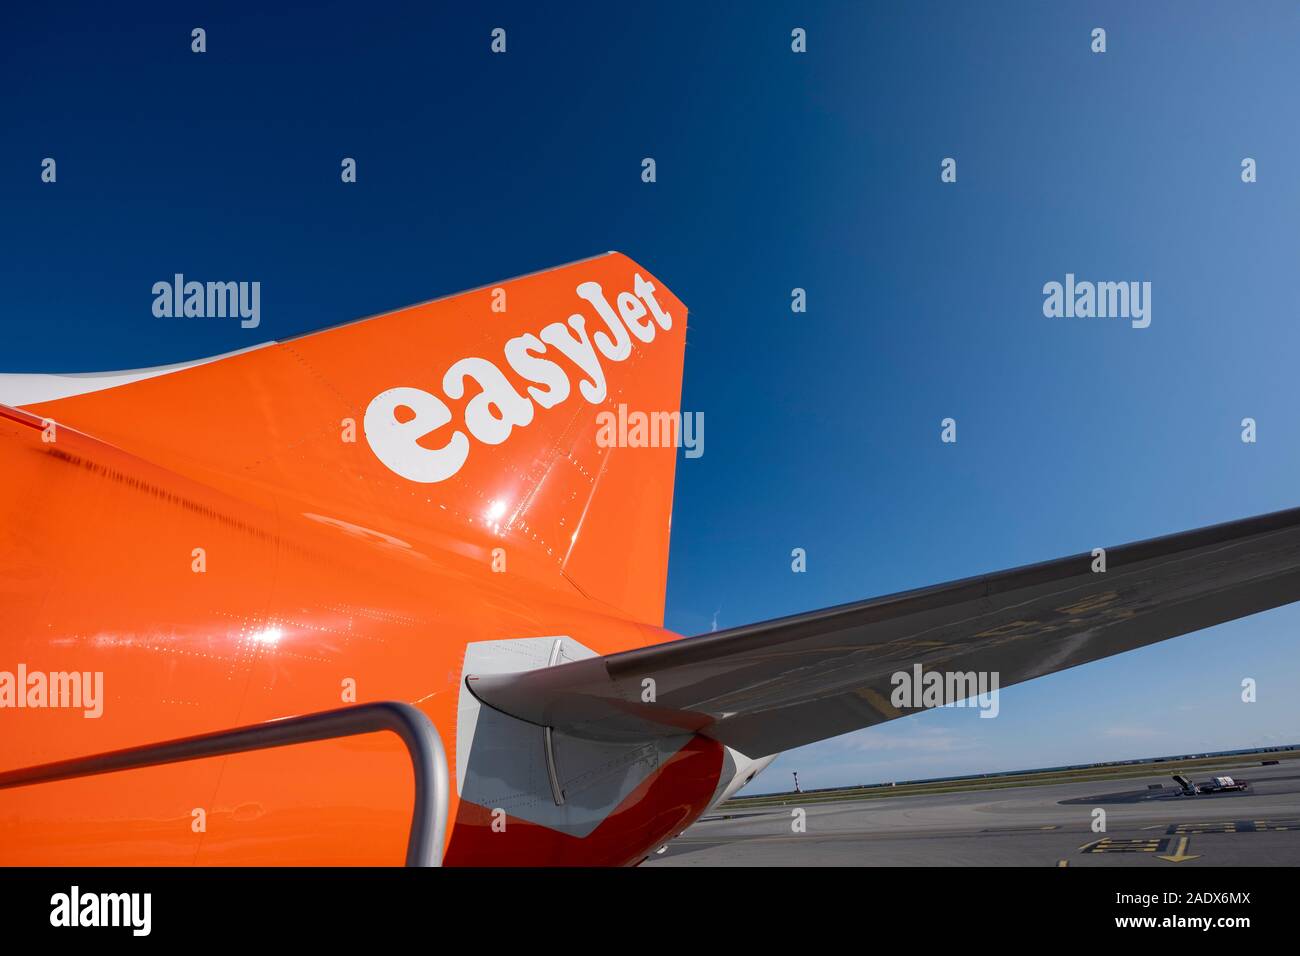 easyJet airplane on an airport runway Stock Photo